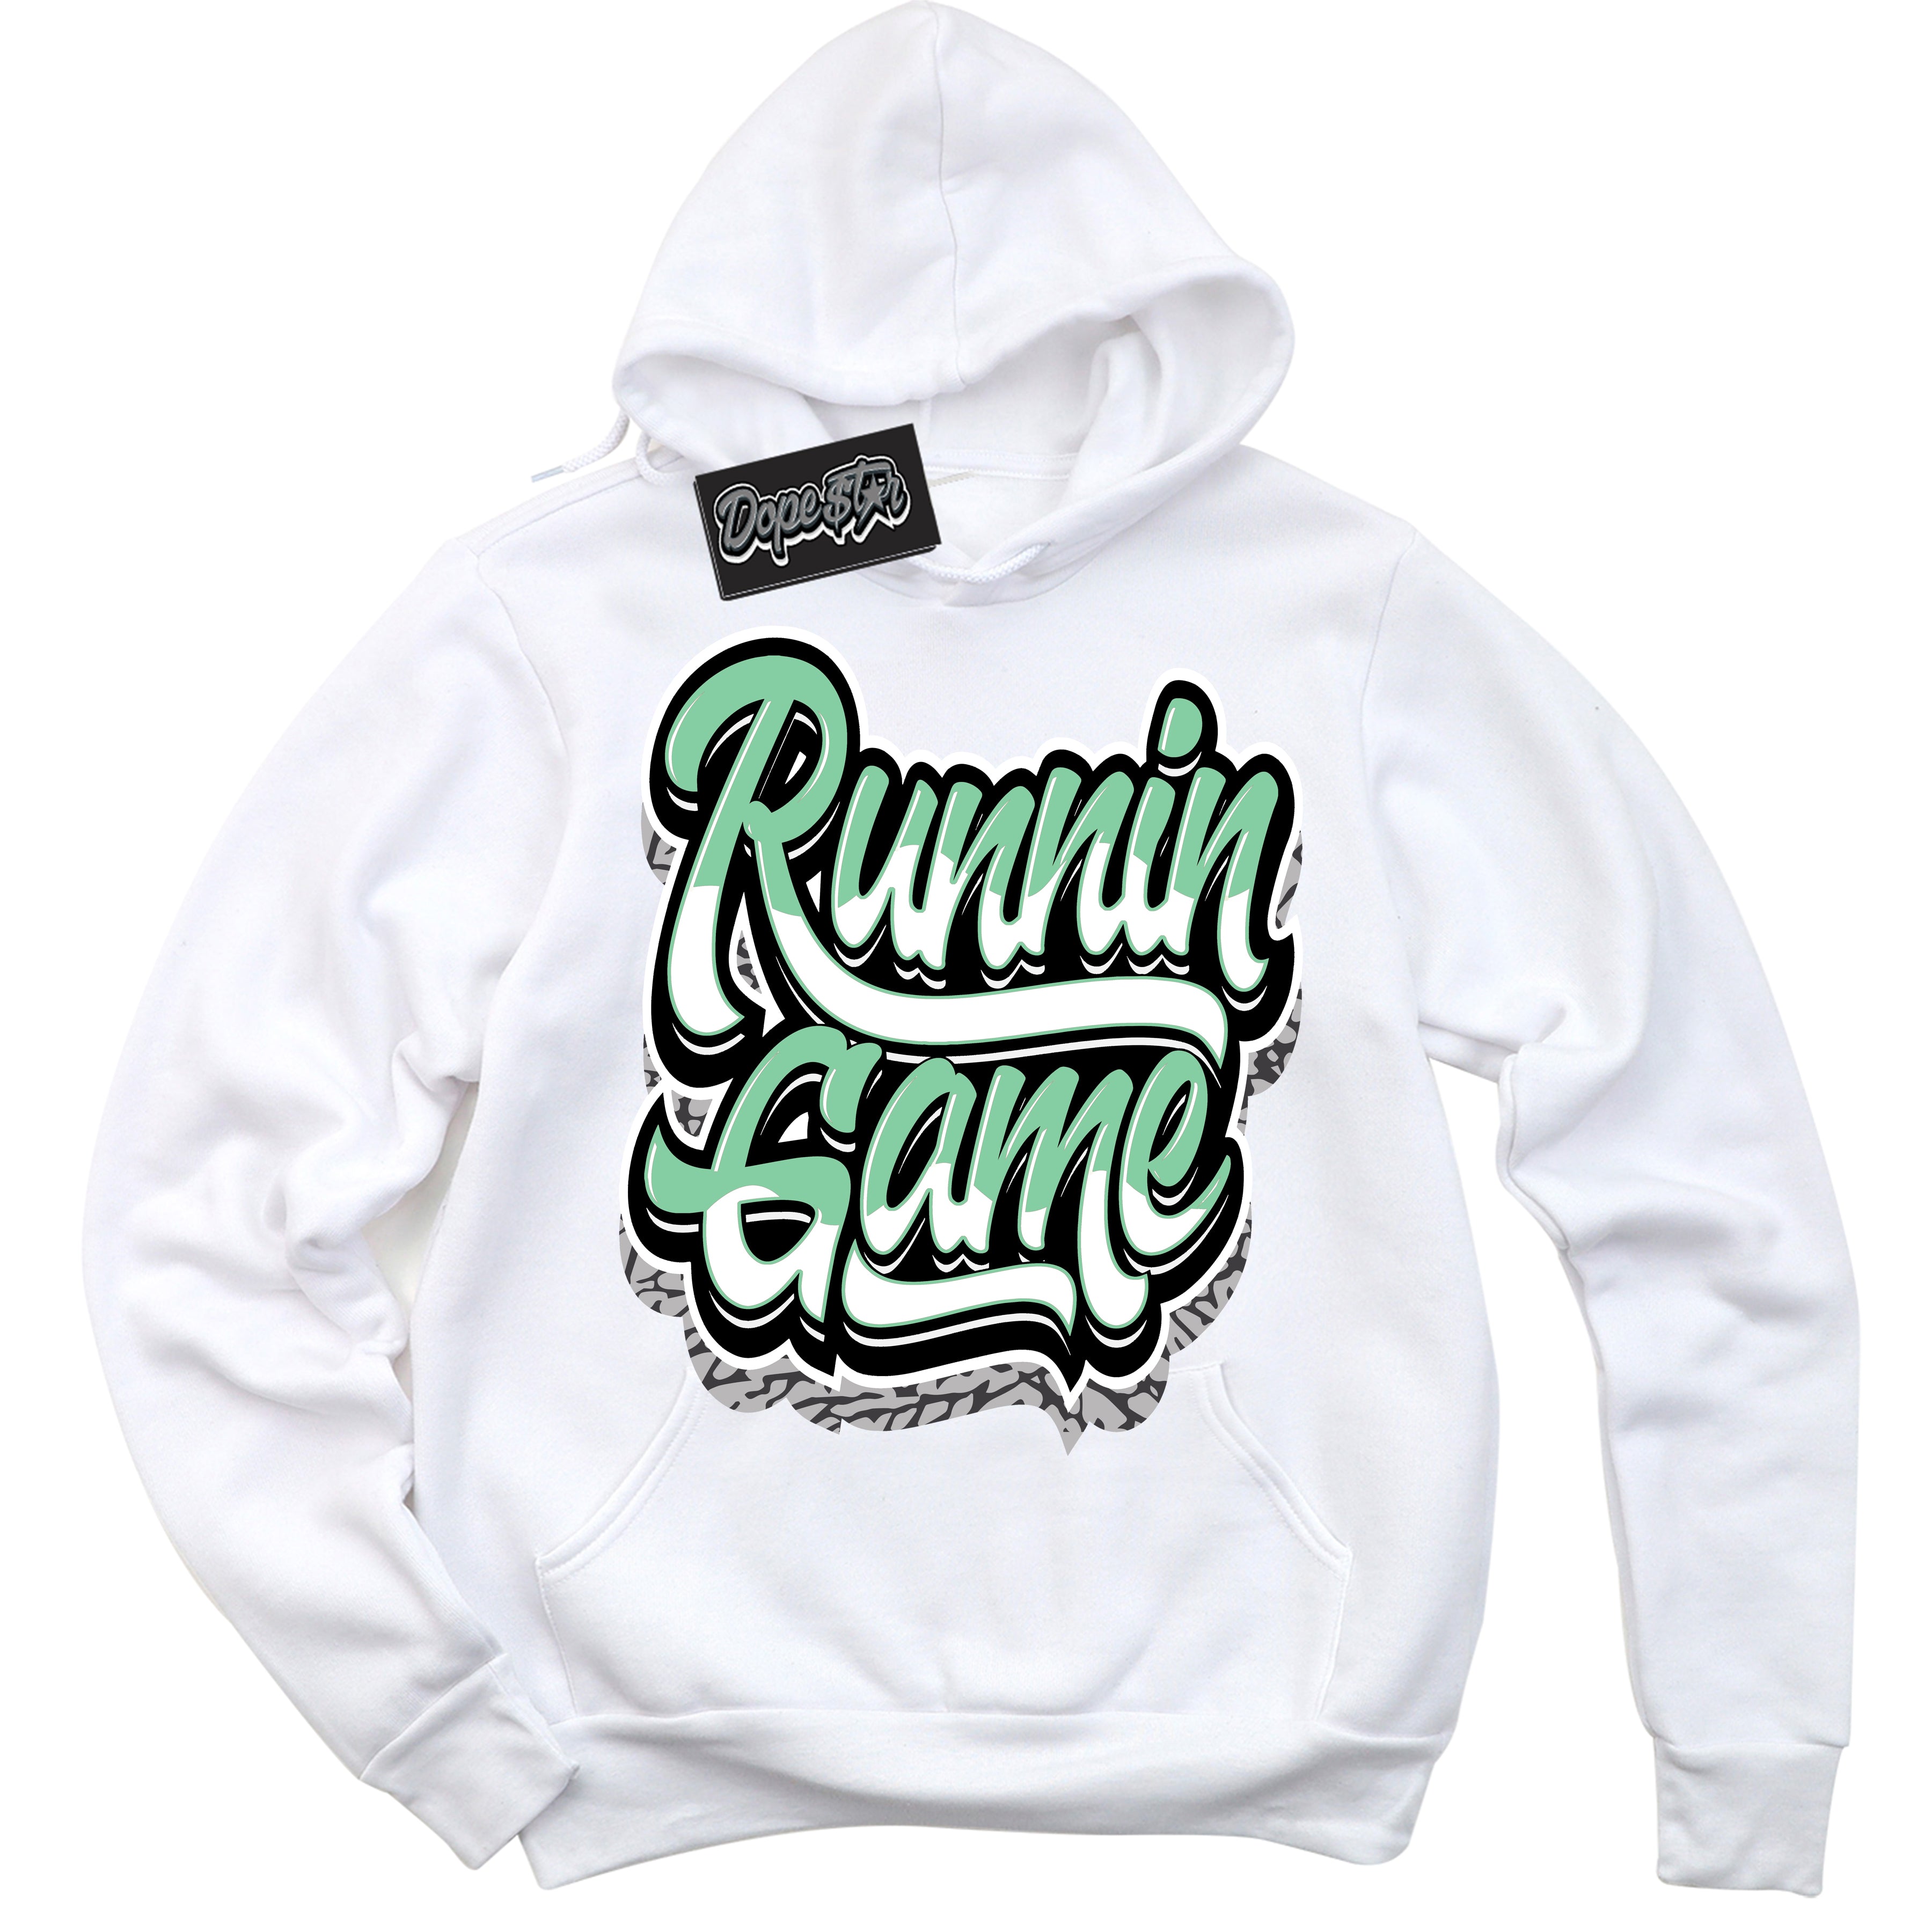 Cool White Graphic DopeStar Hoodie with “ Running Game “ print, that perfectly matches Green Glow 3s sneakers